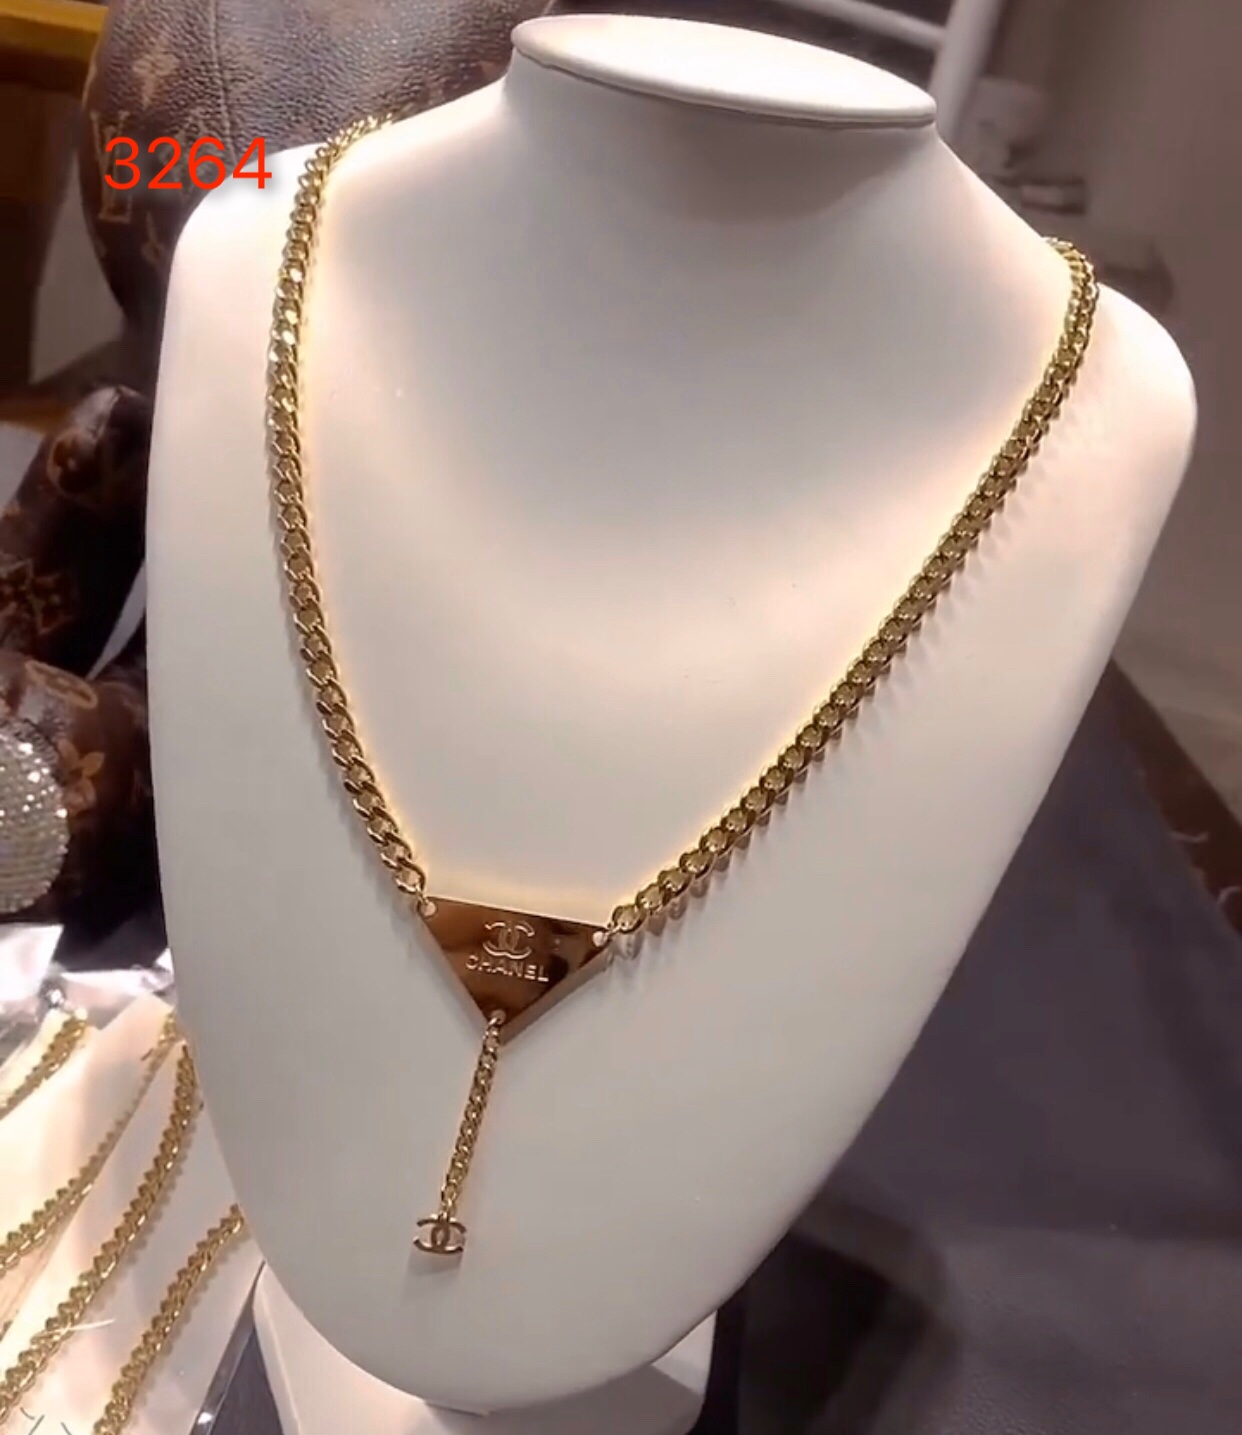 Chanel necklace 109269